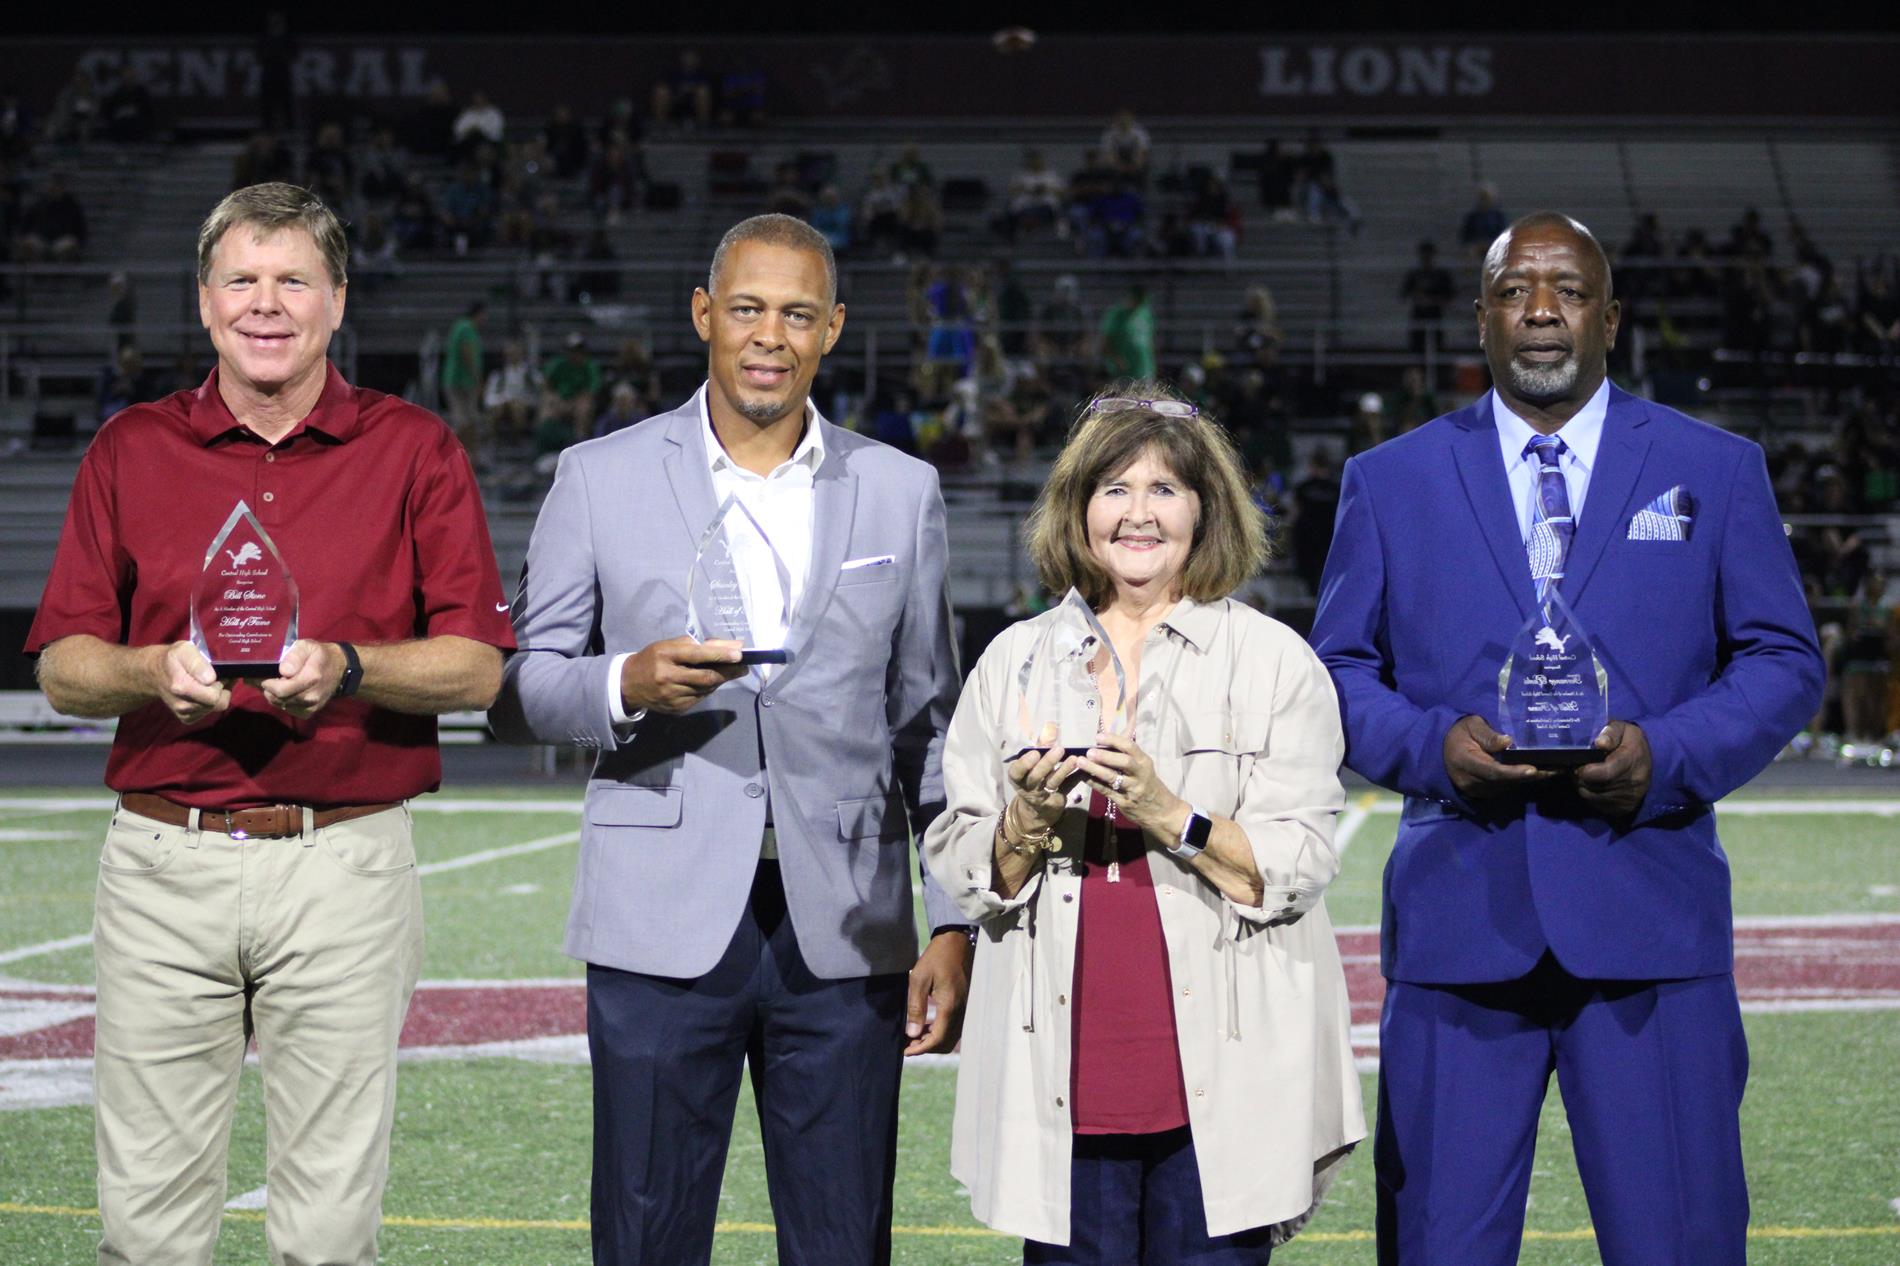 Central High School Recognizes 2022 Hall of Fame Inductees